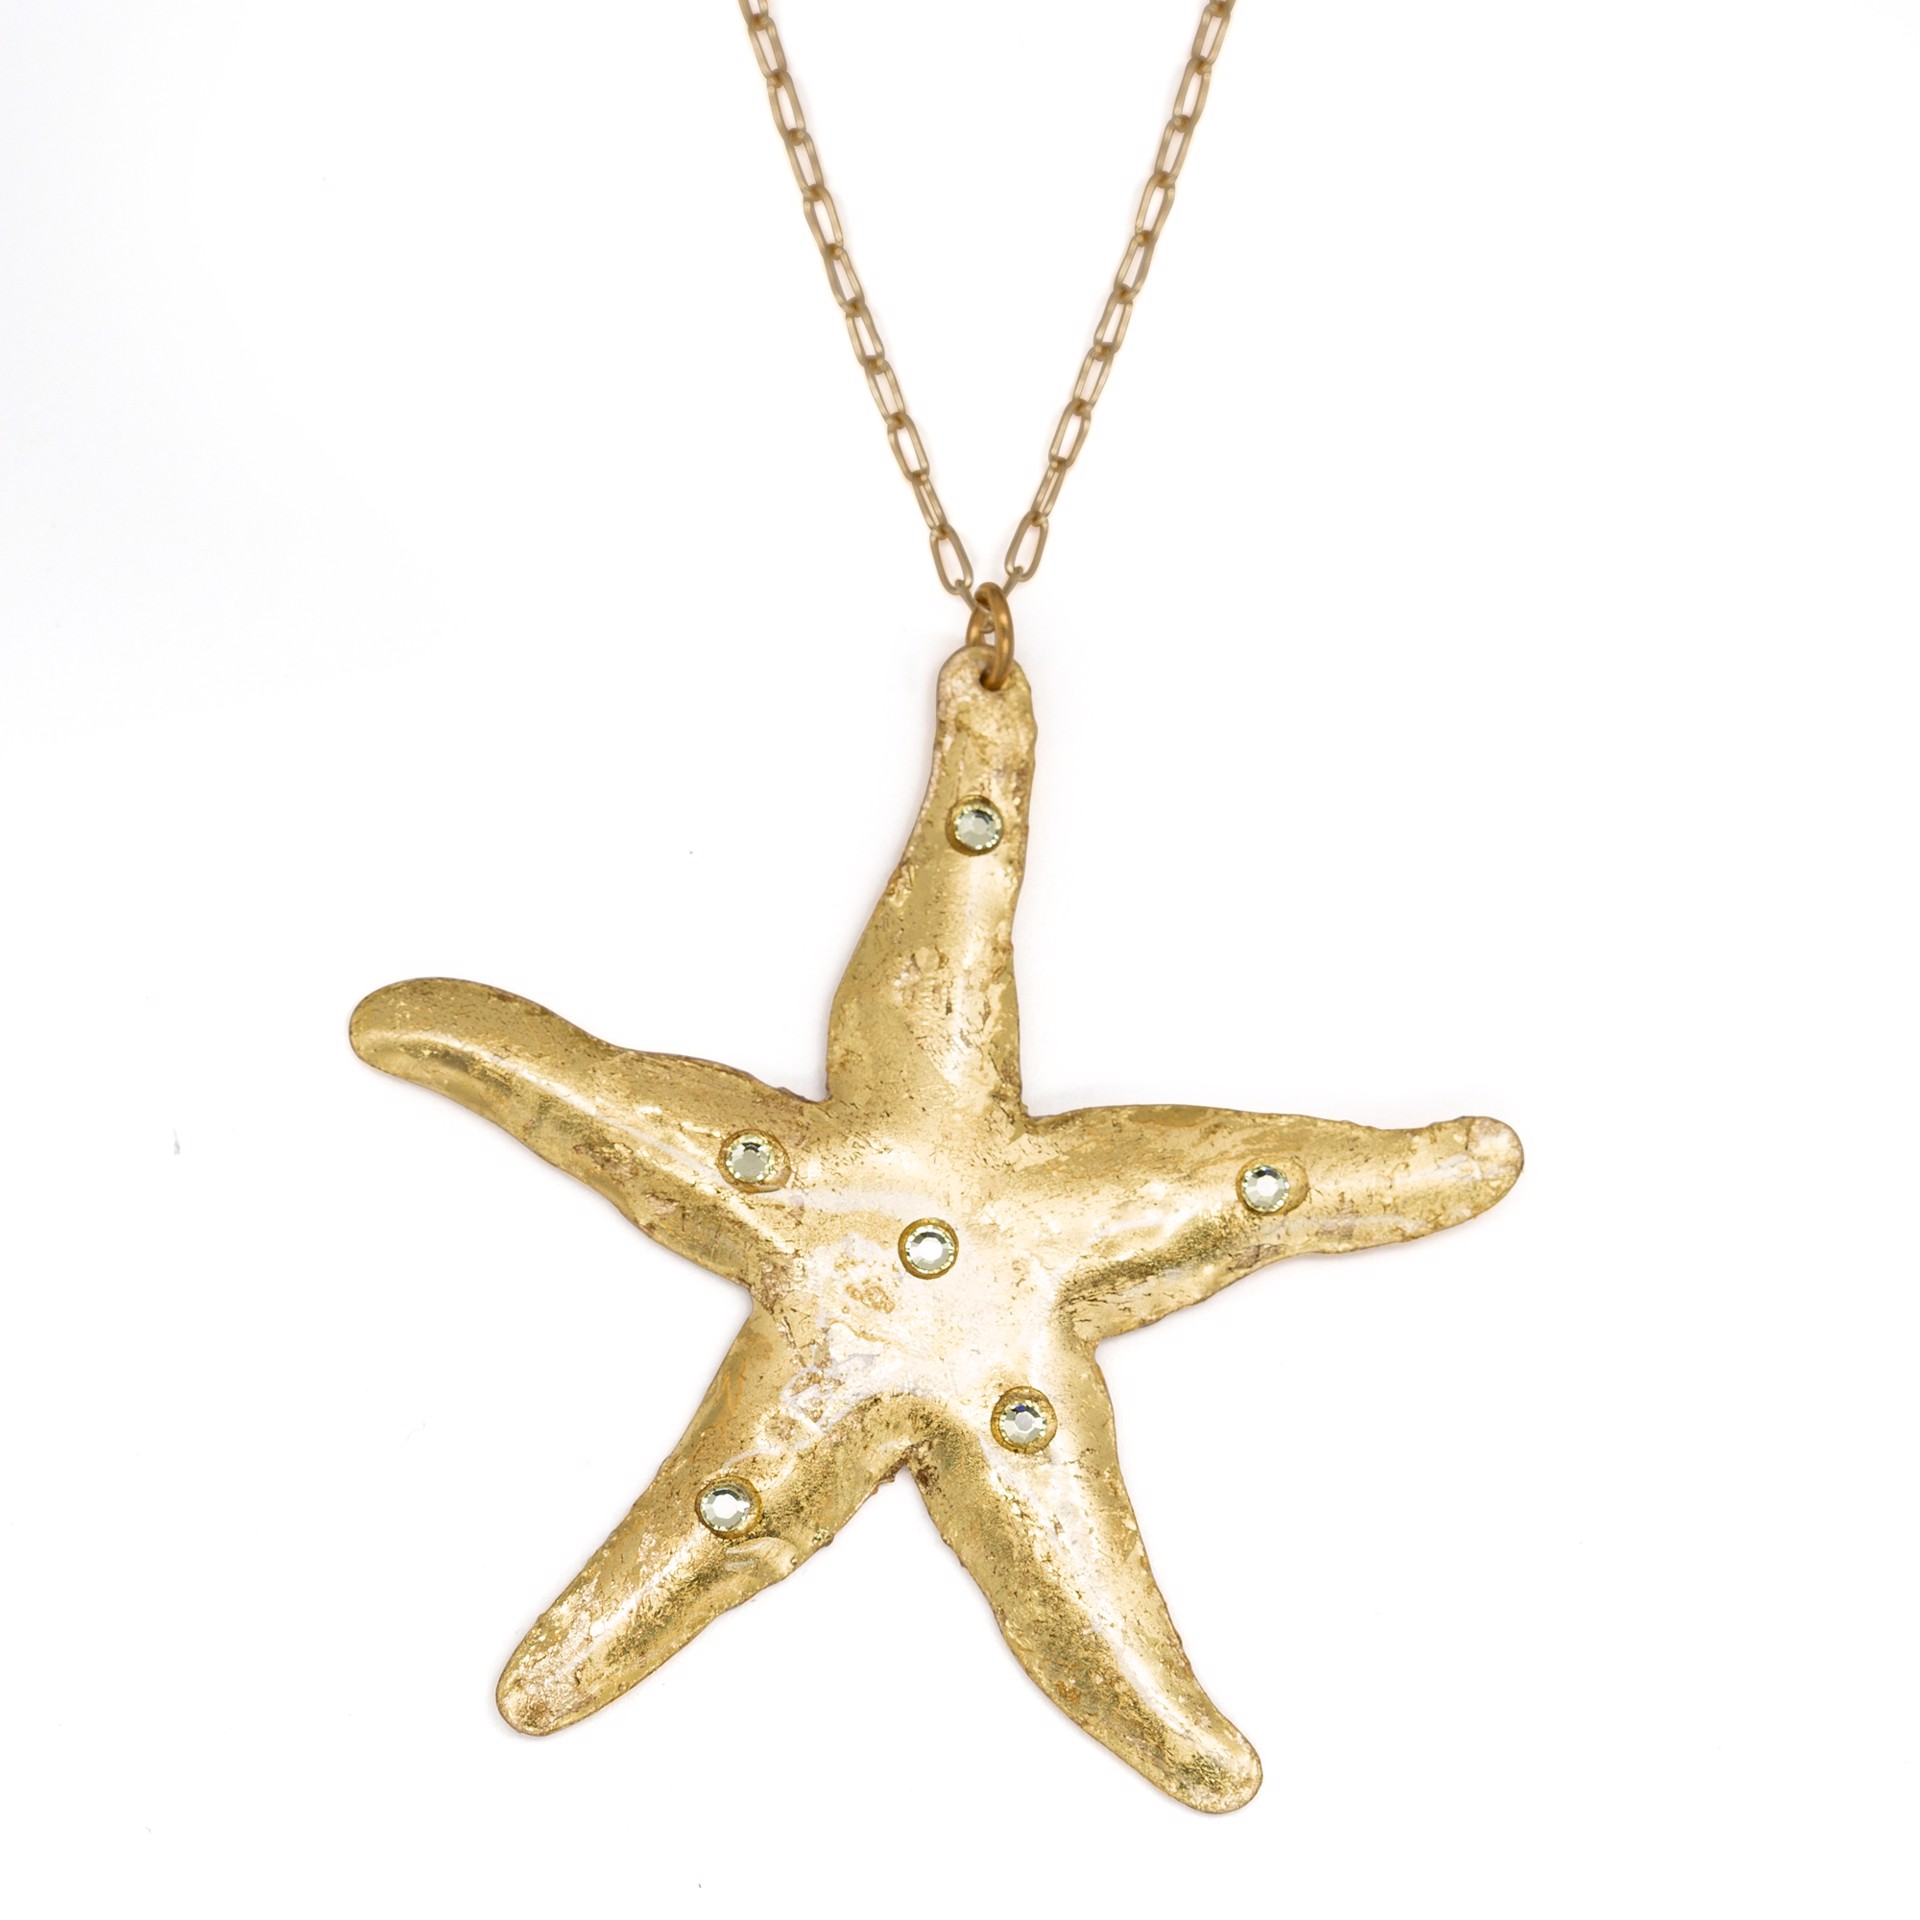 Starfish Necklace with Crystals - 26" Gold by Evocateur